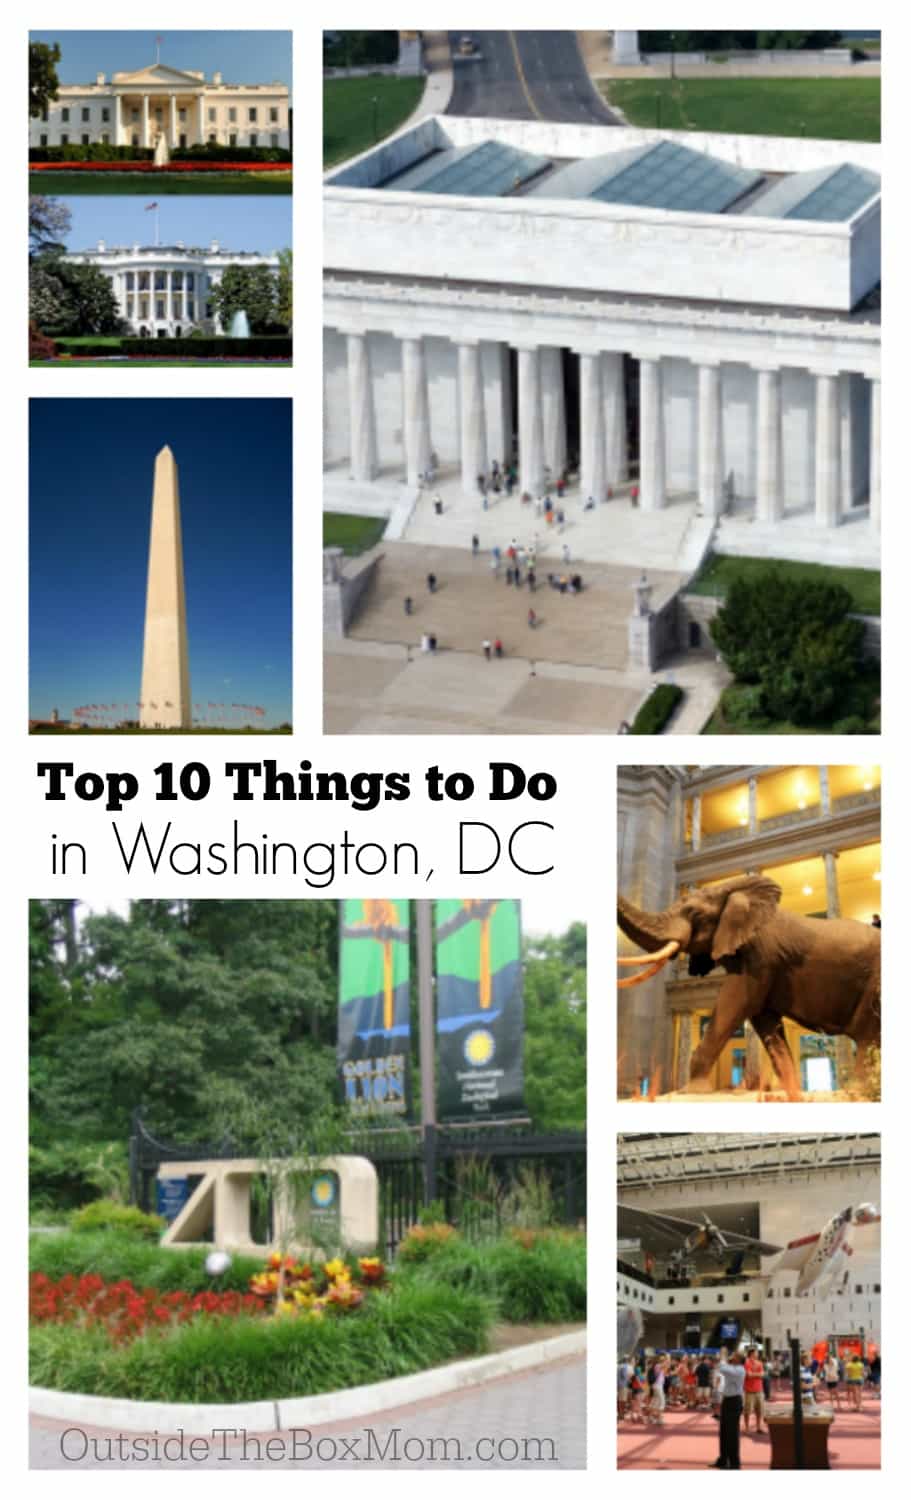 Are you looking for fun things to do in Washington, DC? I've found the perfect list of the top 10 things to do while in whether you are traveling alone, as a couple, or with your family. 